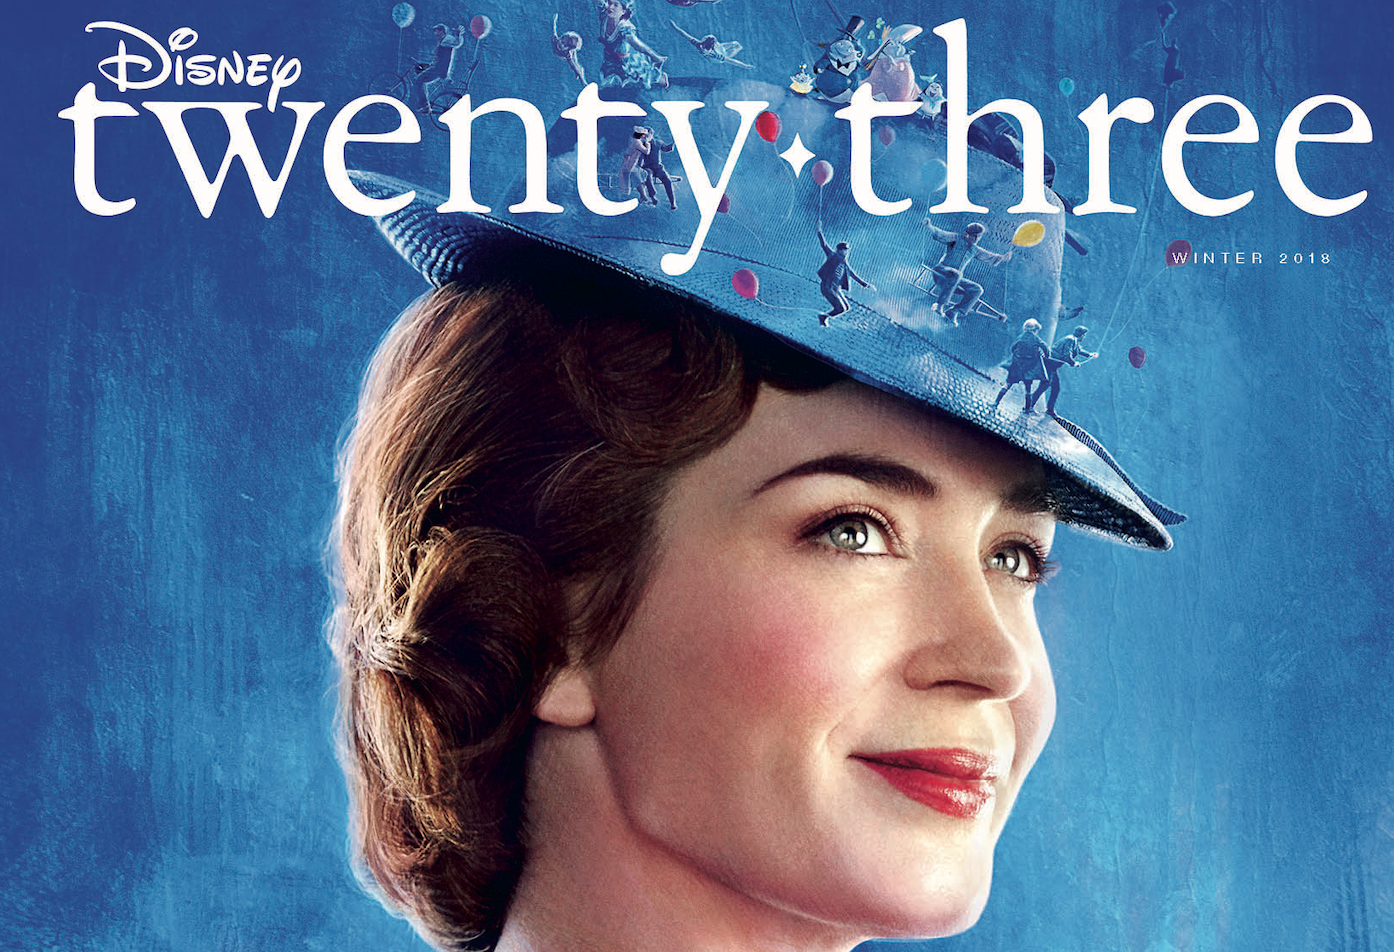 “Mary Poppins Returns” is Practically Perfect for D23